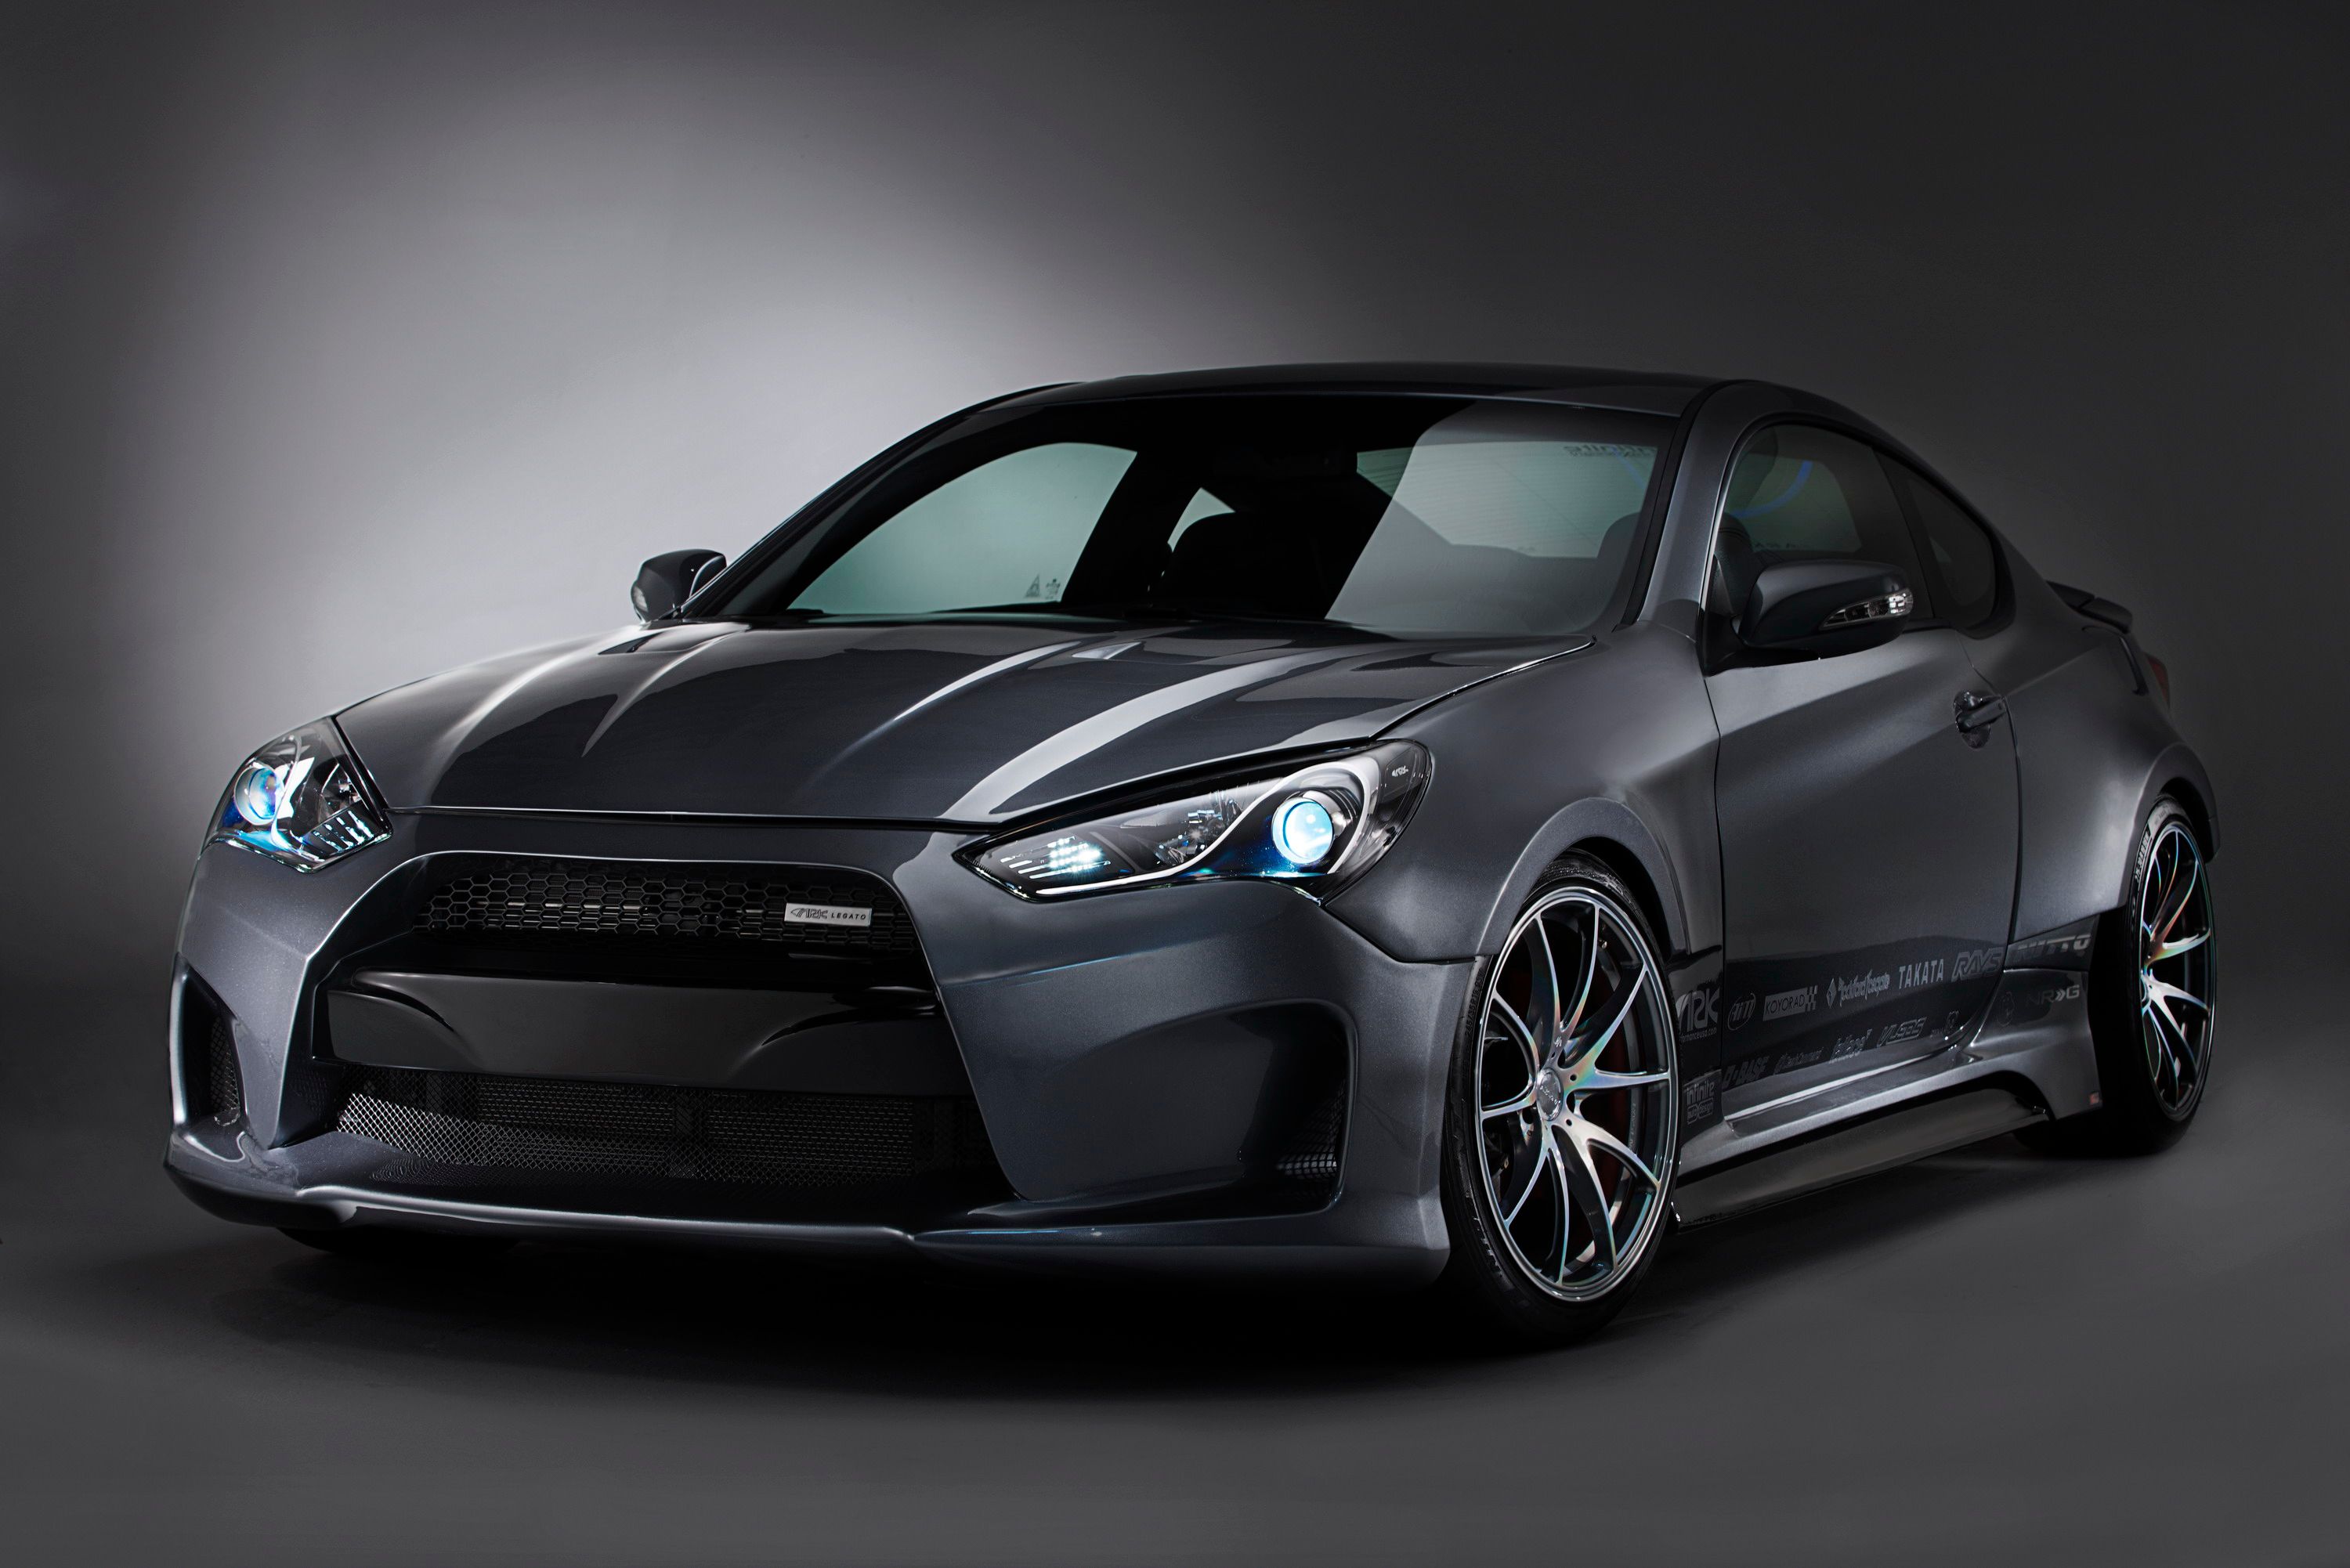 2013 Hyundai Genesis Coupe Legato Concept by ARK Performance